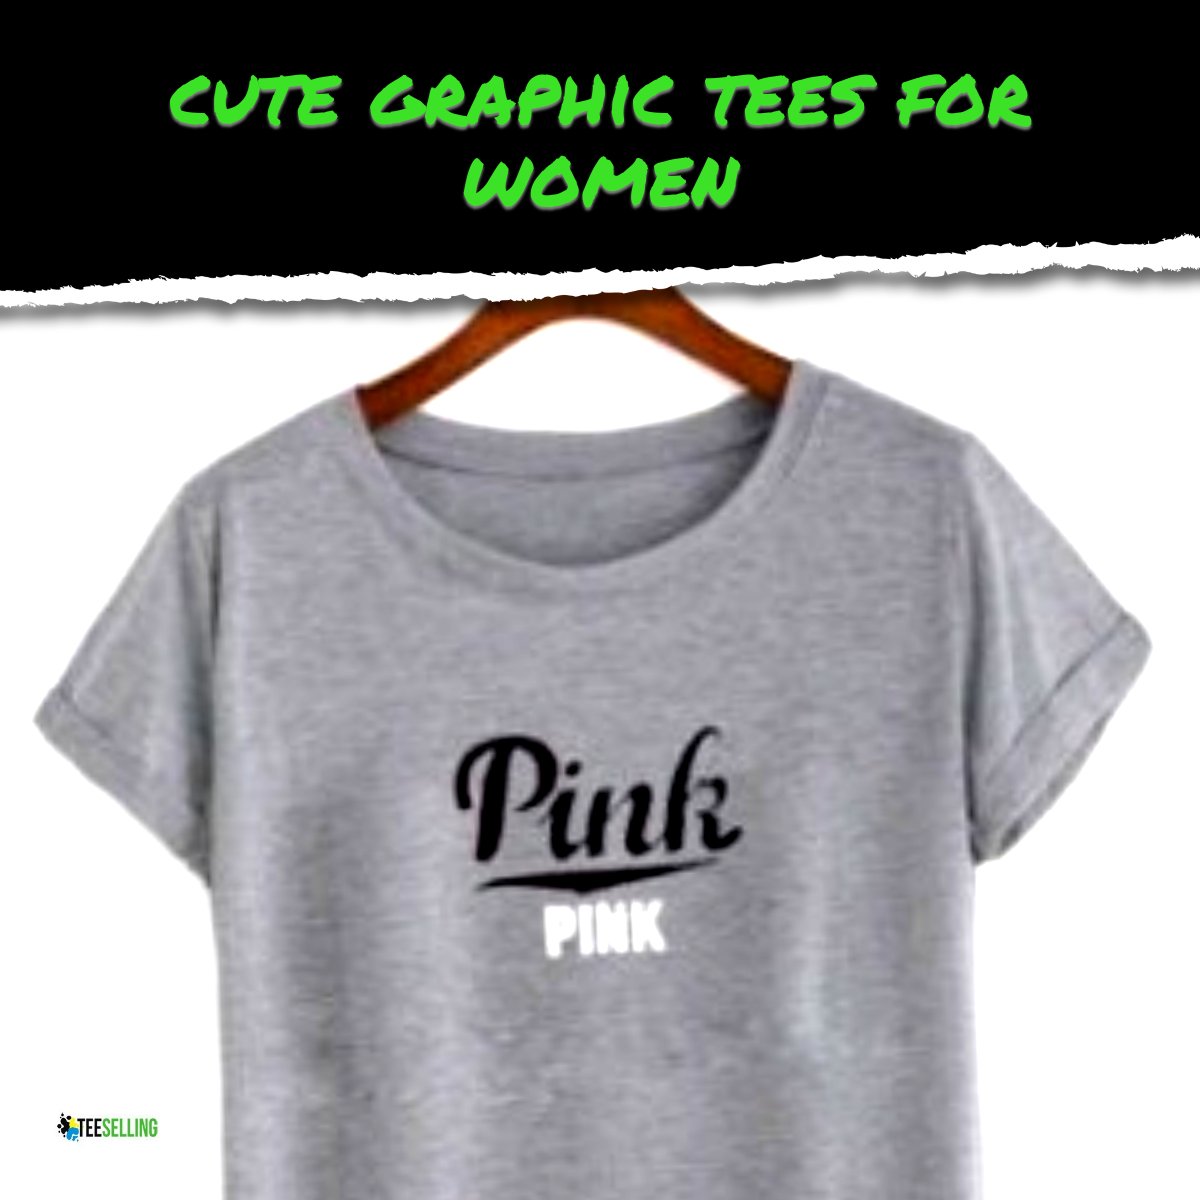 cheap graphic tees online